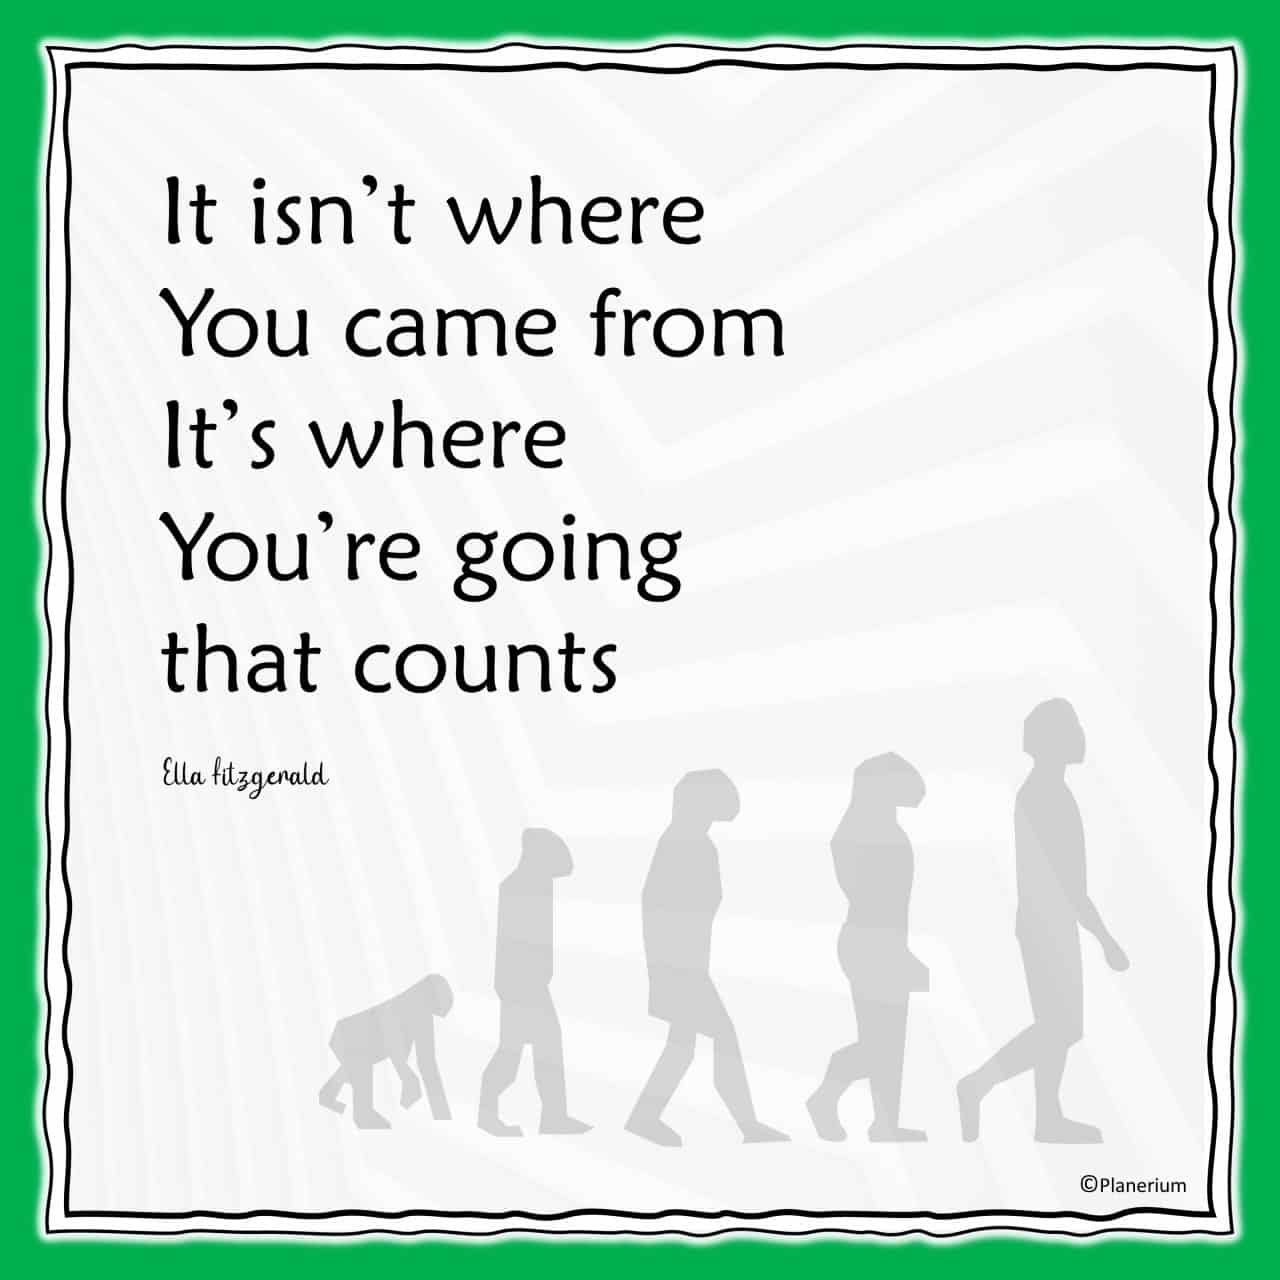 Inspirational Quotes - It Is Where You Are Going | Planerium